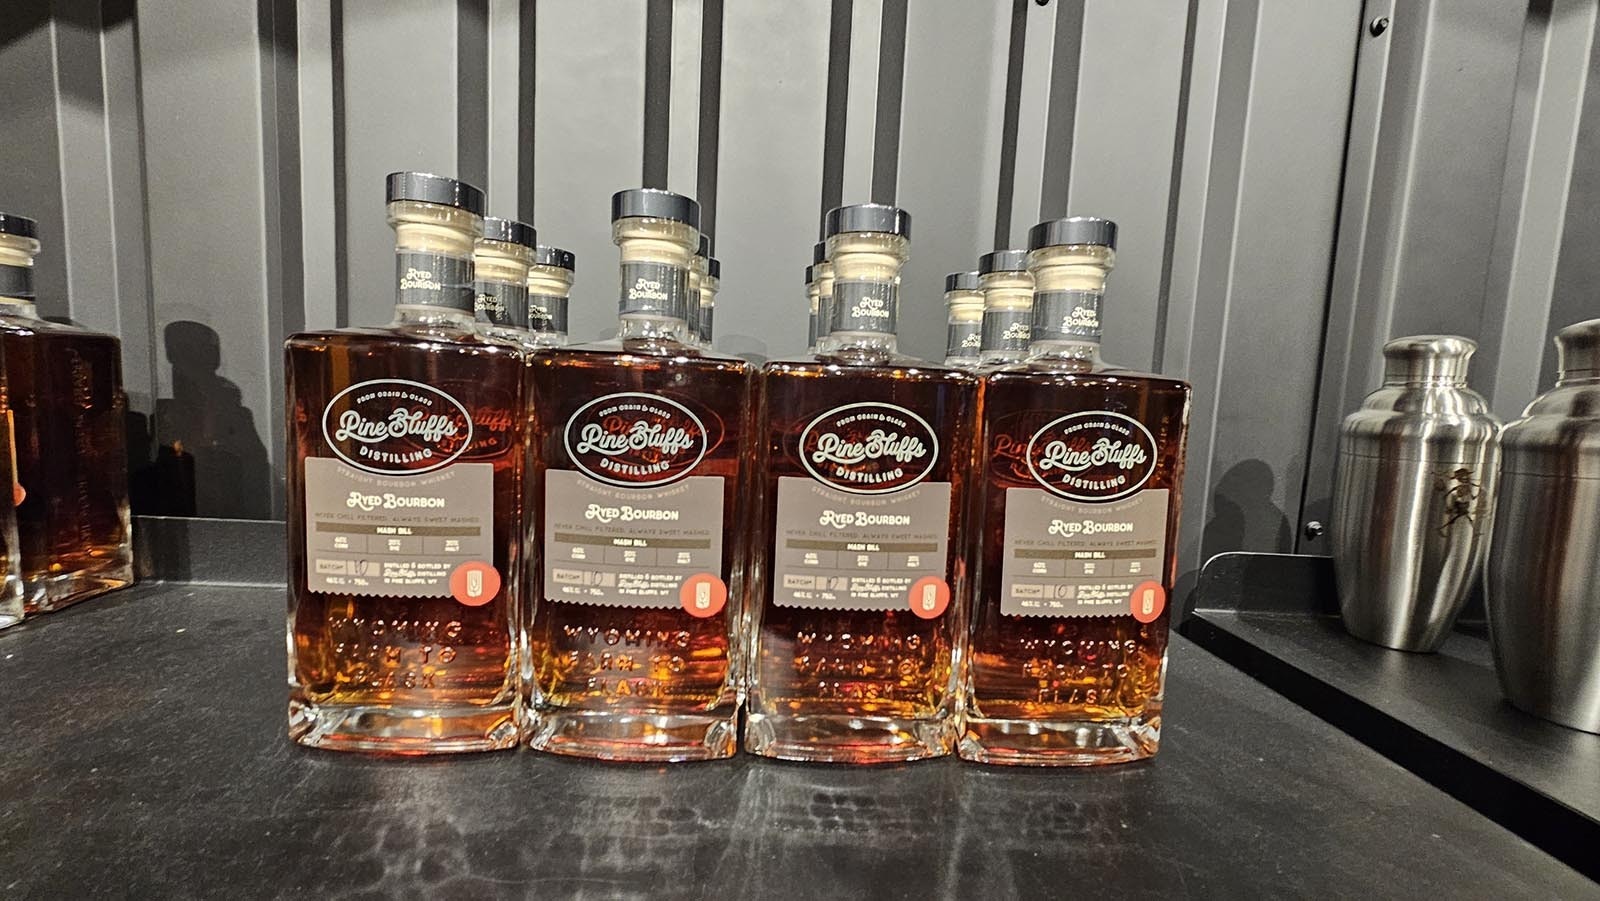 Ryed Bourbon is one of the whiskeys available at Pine Bluffs Distilling that may also be purchased to take home.